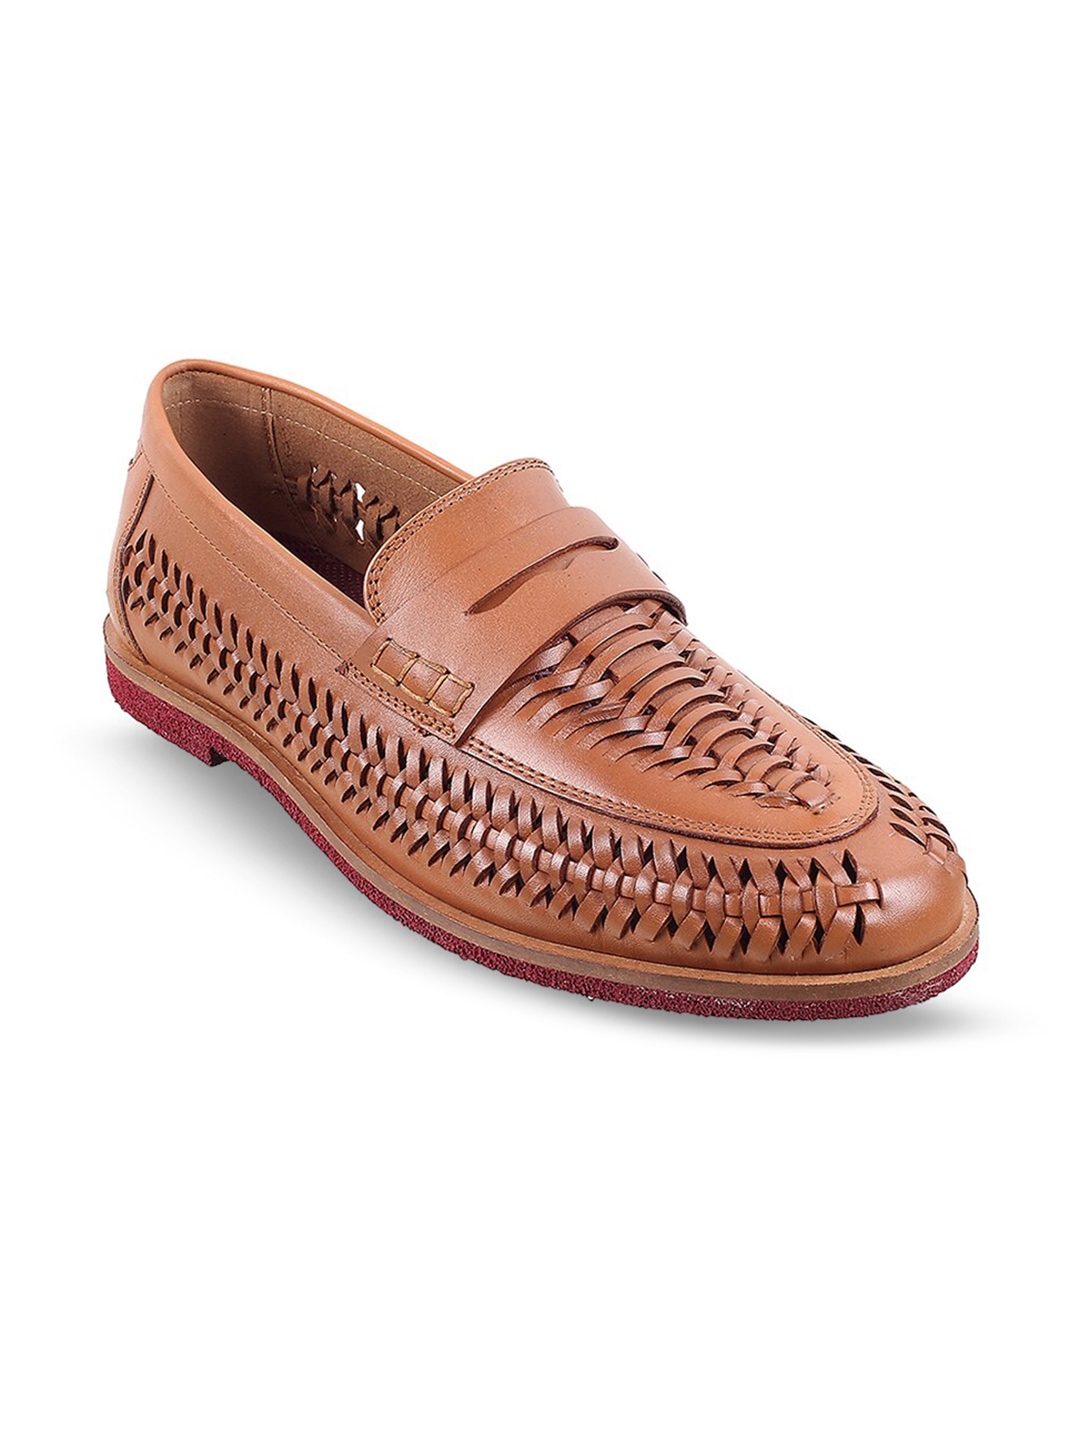 

Metro Men Textured Leather Penny Loafers, Tan